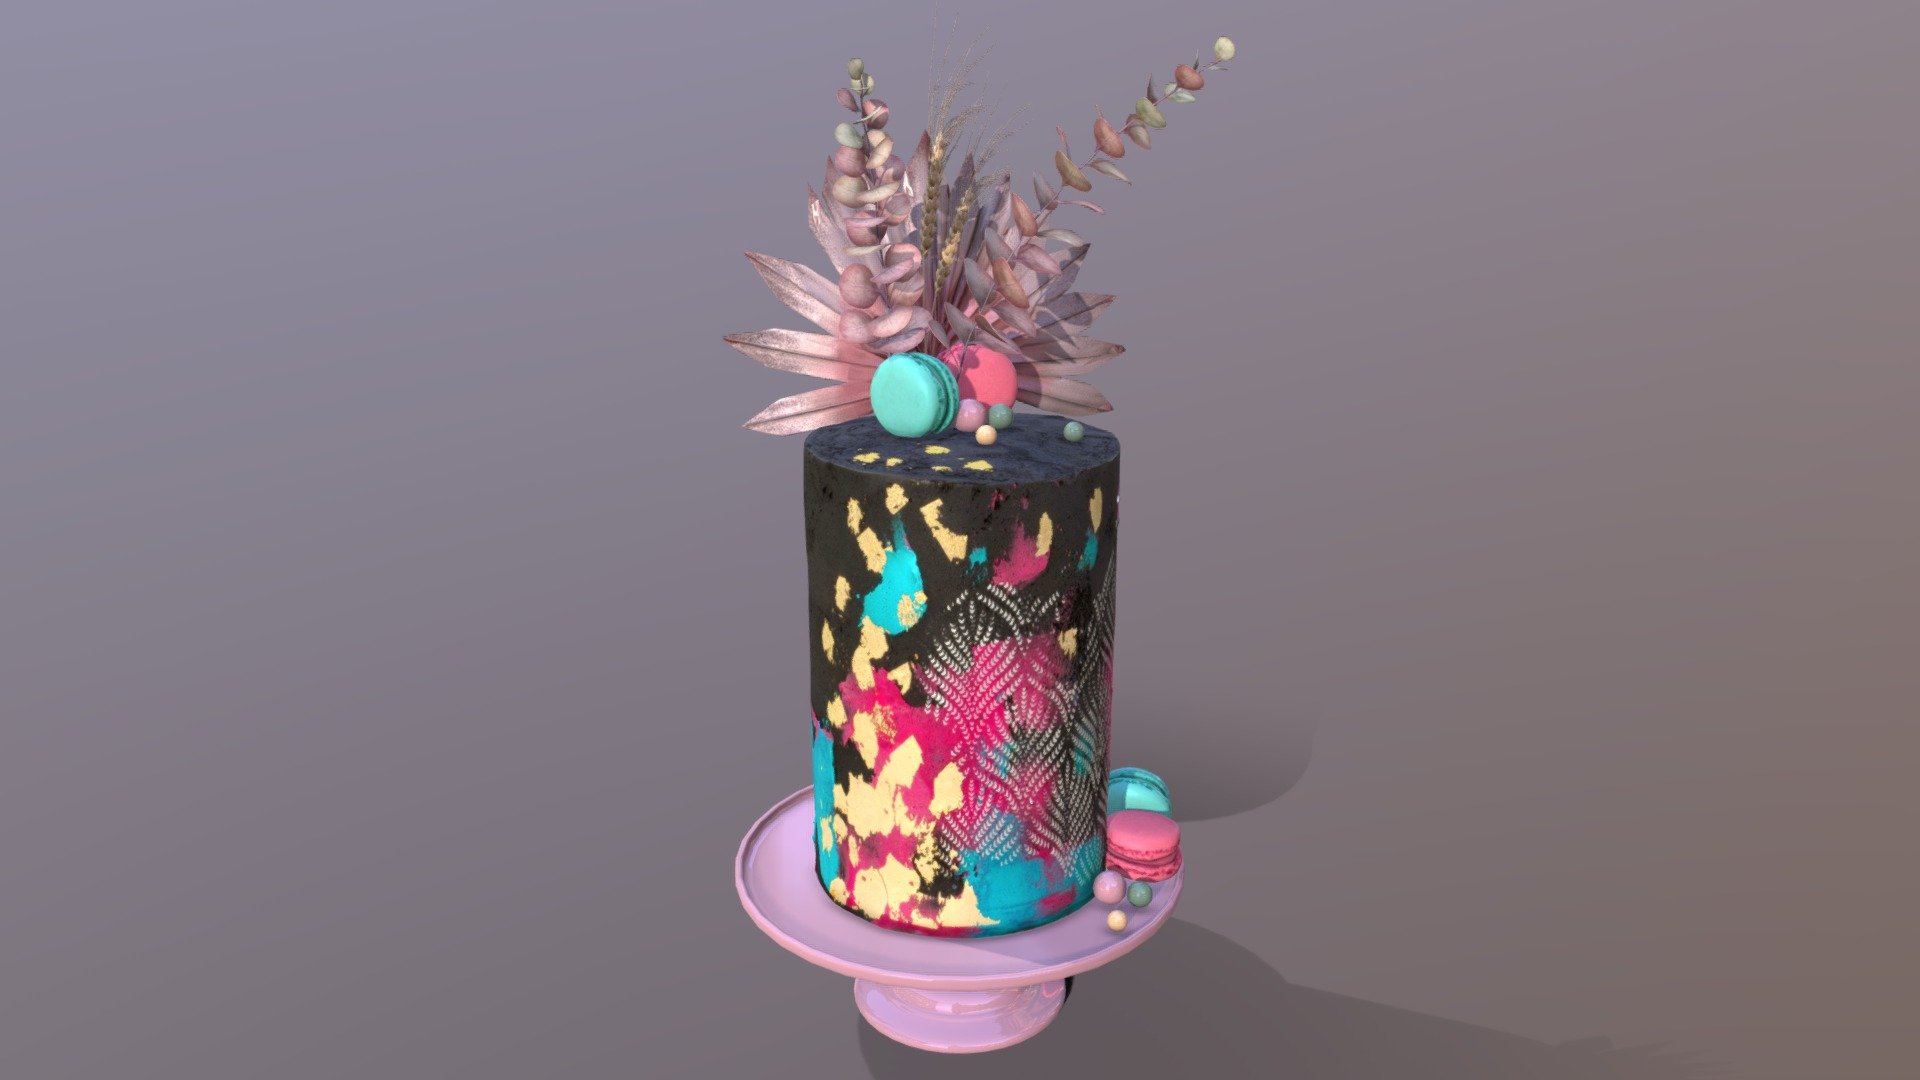 3D scan of a Luxury Buttercream Cake on the mosser stand which is made by CAKESBURG Online Premium Cake Shop in UK. 

This 3D cake can be personalised with any text and colour you want. Please contact us.

You can also order real cake from this link: https://cakesburg.co.uk/products/luxury-buttercream-cake-06?_pos=1&amp;_sid=27f107744&amp;_ss=r

Cake Textures - 4096*4096px PBR photoscan-based materials (Base Color, Normal, Roughness, Specular, AO)

Macarone textures - 4096*4096px PBR photoscan-based materials (Base Color, Normal, Roughness, Specular, AO)

Palm, Eucalyptus and Wheat Textures - 4096*4096px PBR photoscan-based materials (Base Color, Normal, Roughness, Specular, AO) - Luxury Turquoise Buttercream Cake - Buy Royalty Free 3D model by Cakesburg Premium 3D Cake Shop (@Viscom_Cakesburg) 3d model